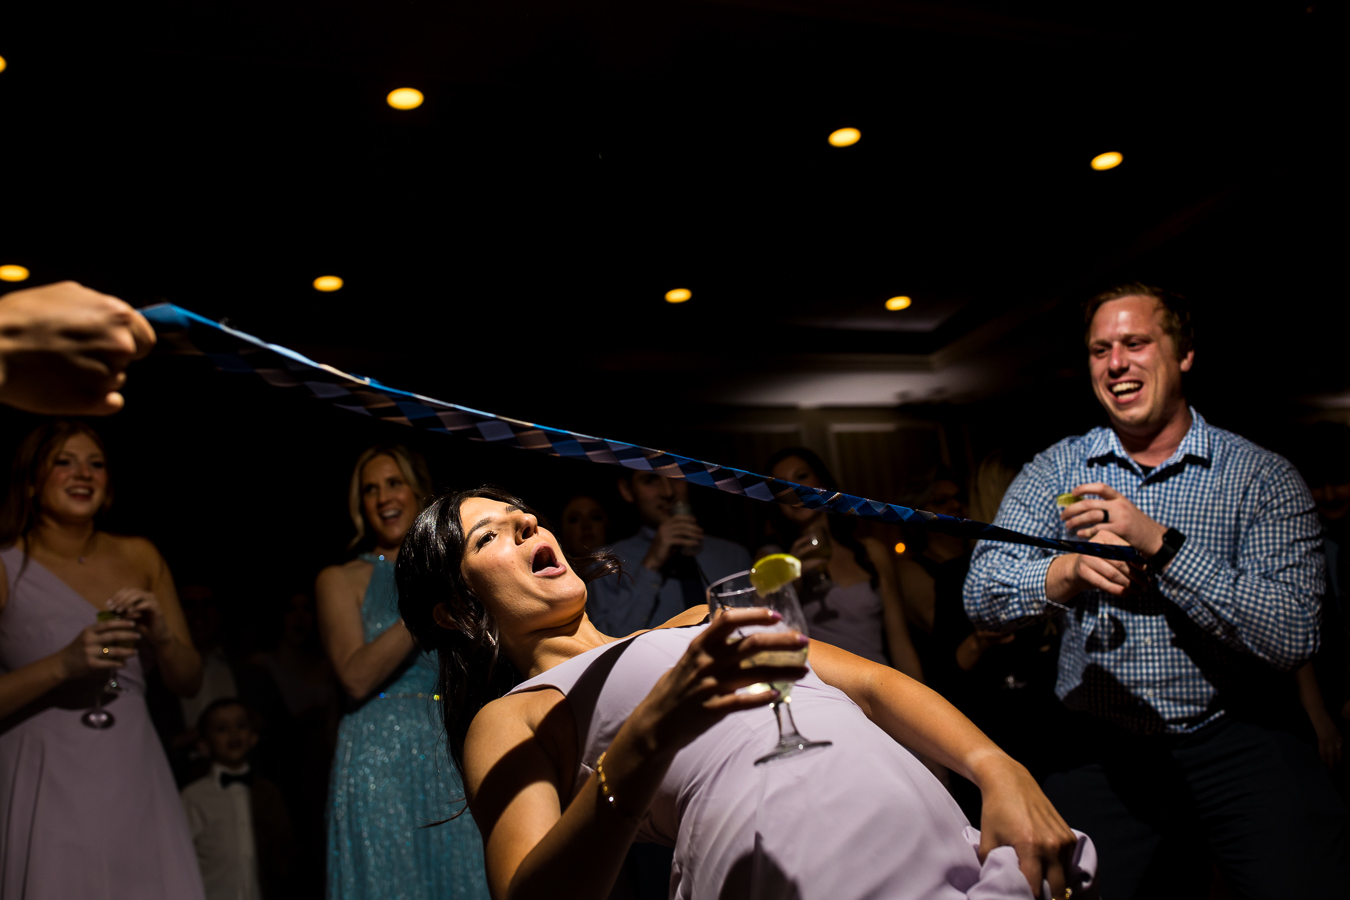 country club of york wedding photographer, lisa rhinehart, captures this fun image of a bridesmaid playing limbo with a drink in her hand at this wedding reception